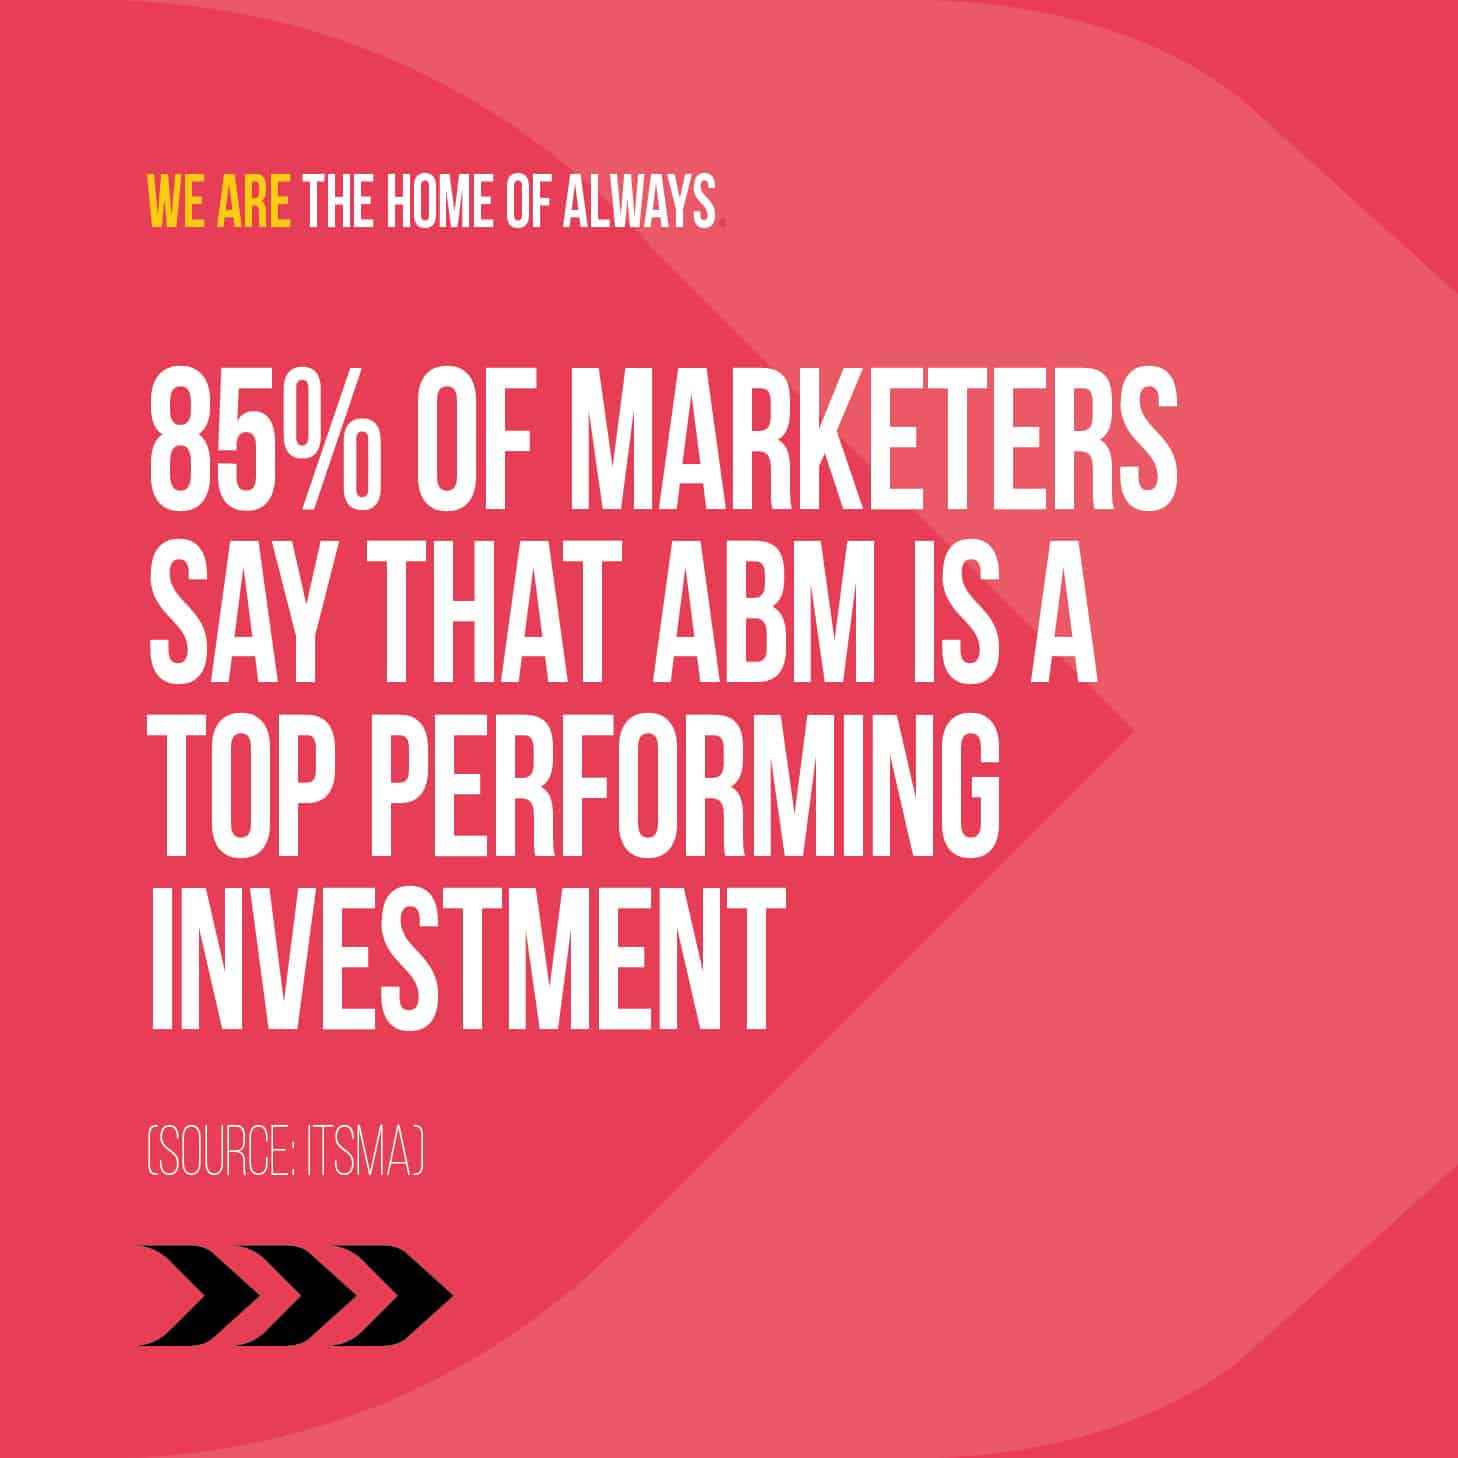 85% of marketers say that ABM is a top performing investment.